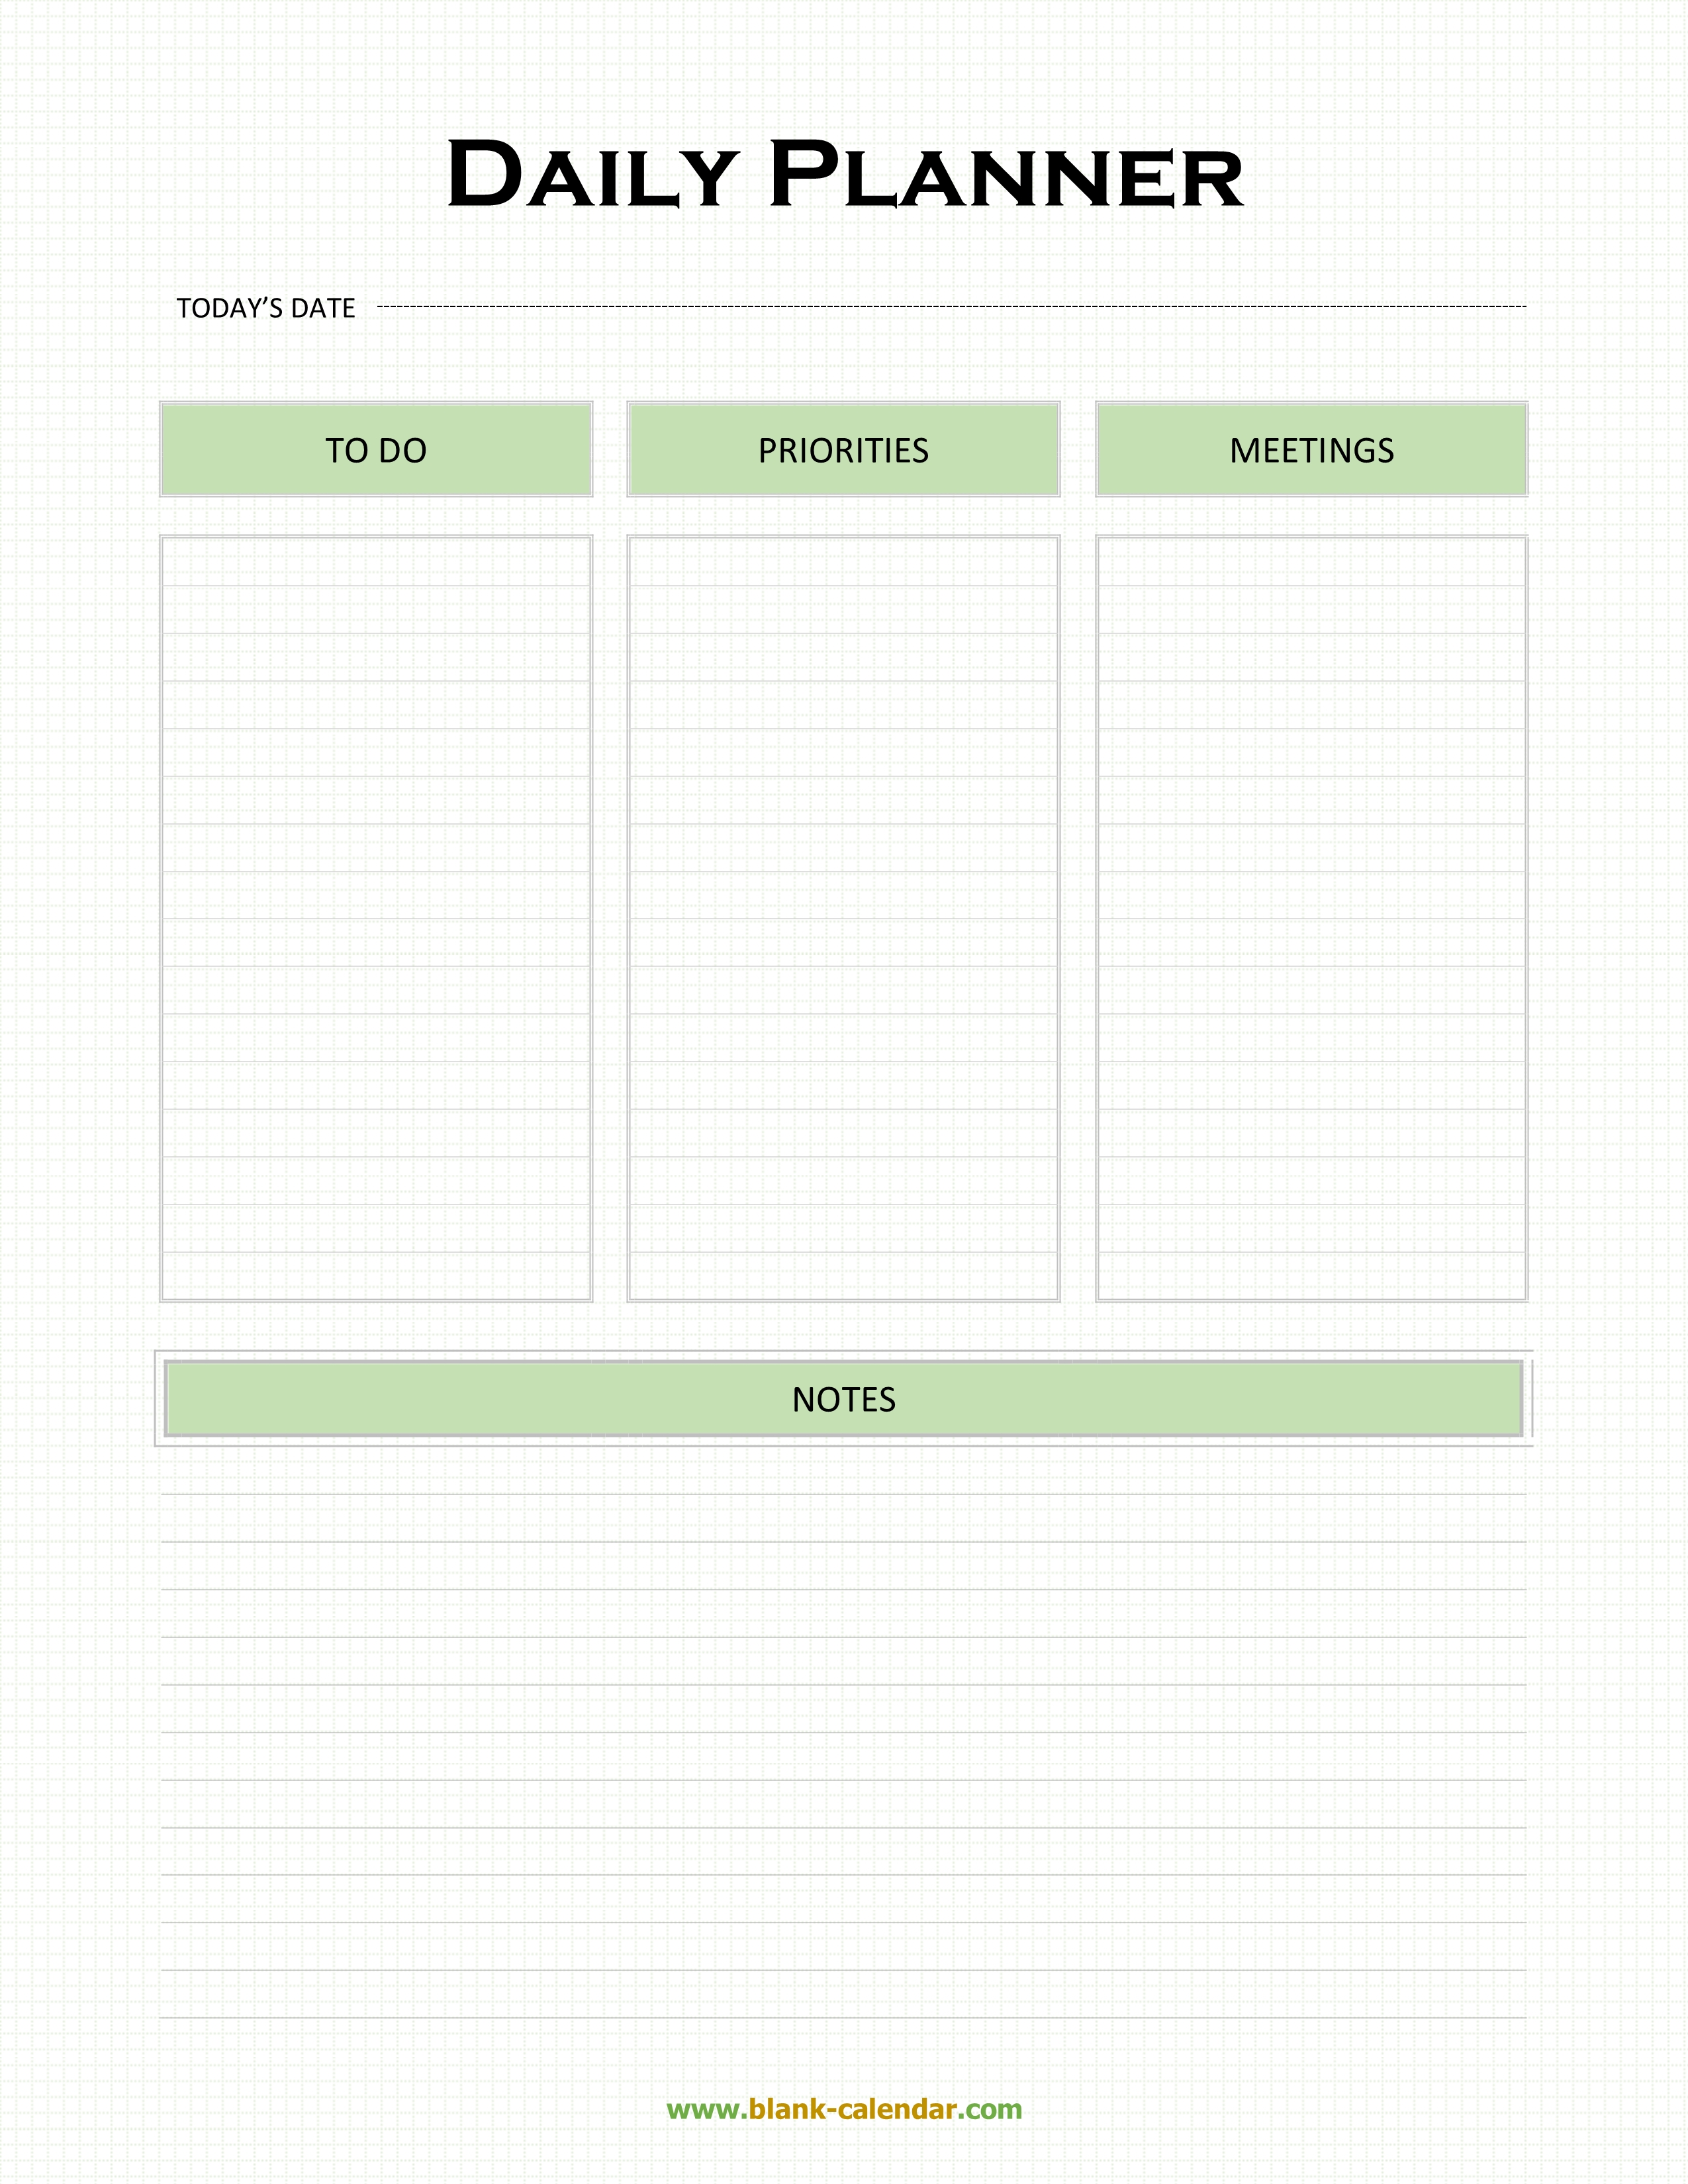 Daily Planner Templates Word Excel Pdf